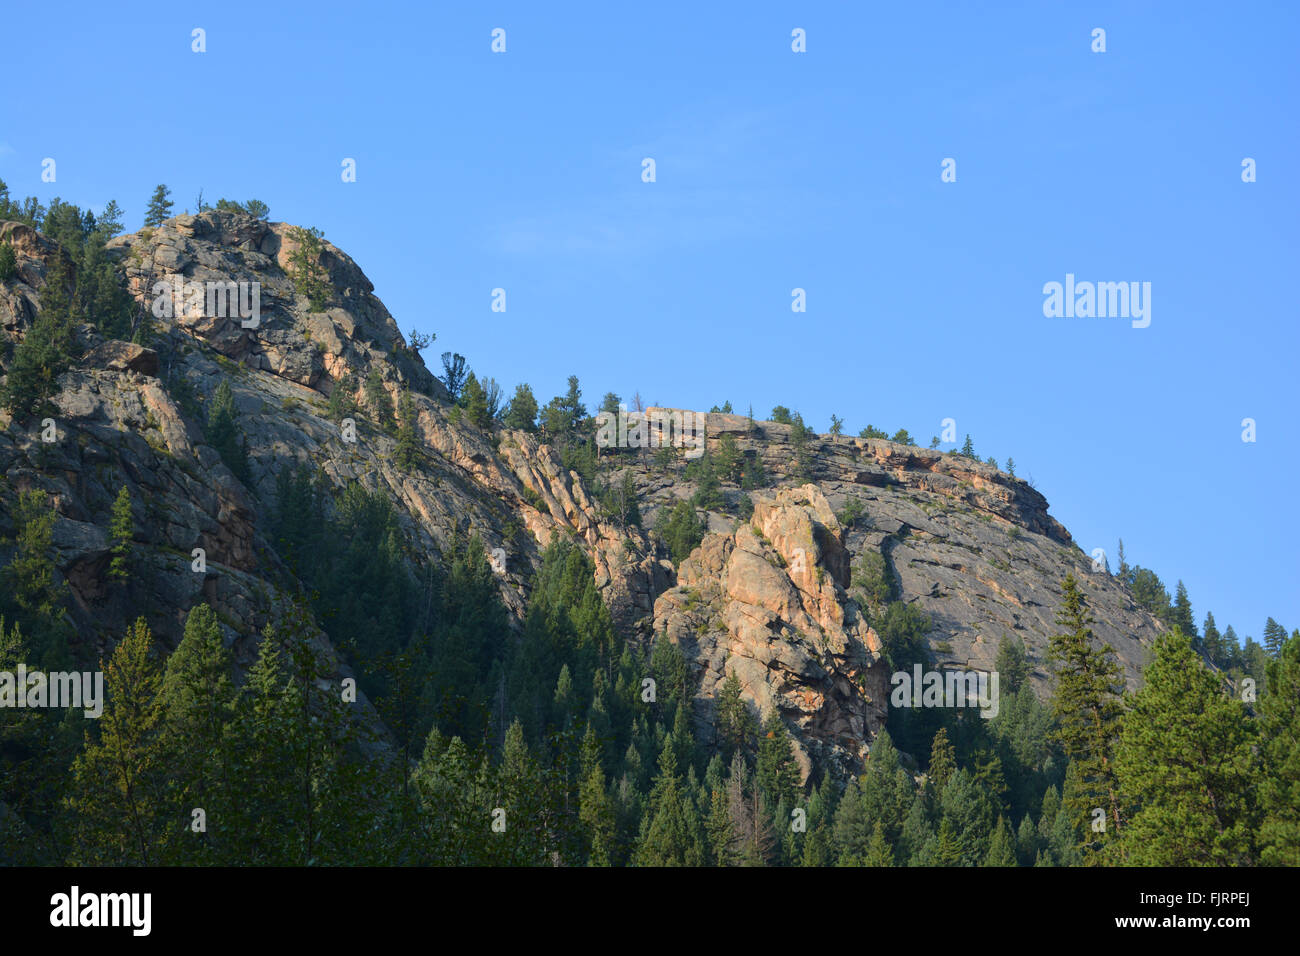 Big Rock Canyon Wall with Trees Stock Photo